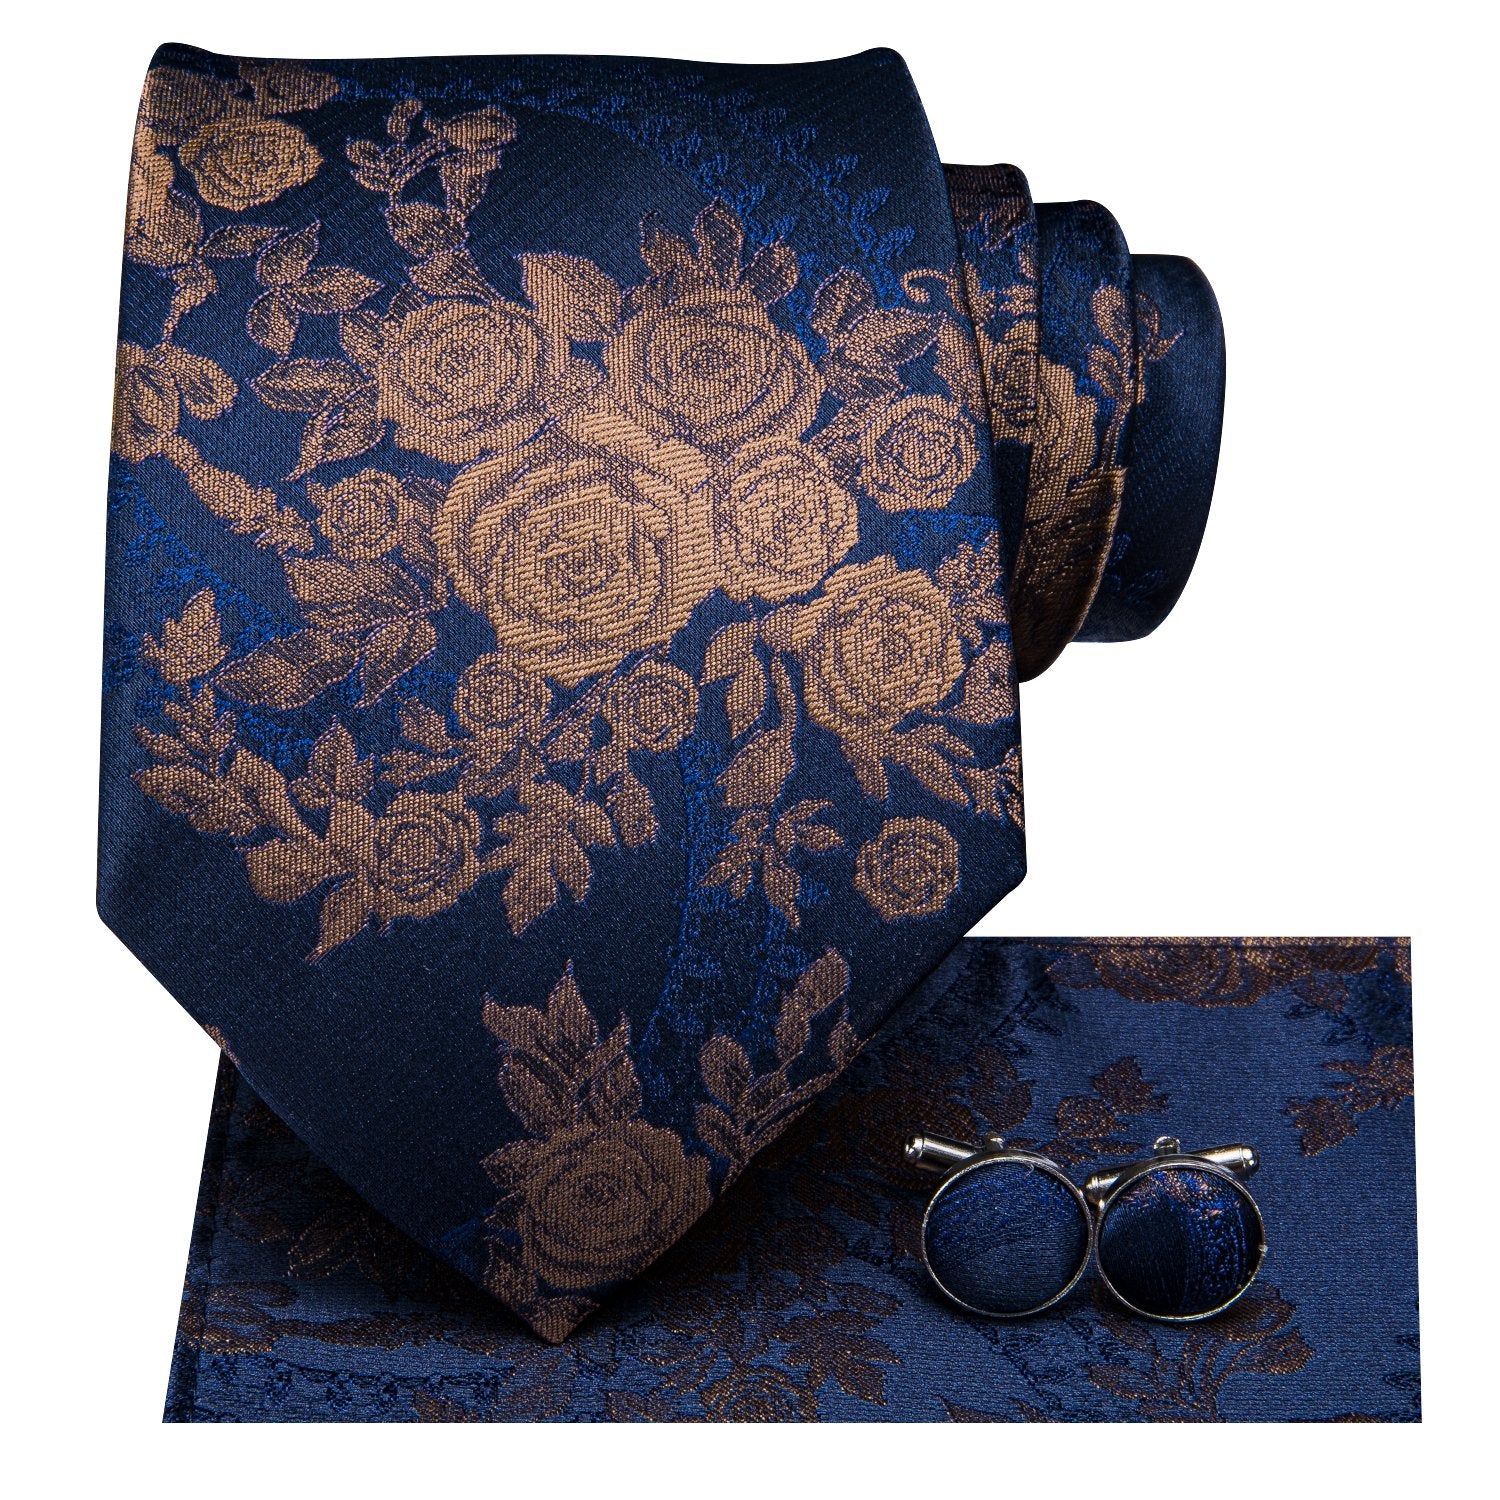 Hi-Tie DarkBlue Floral Tie with Brown Roses Pocket Square Cufflinks Set and Collar Pin